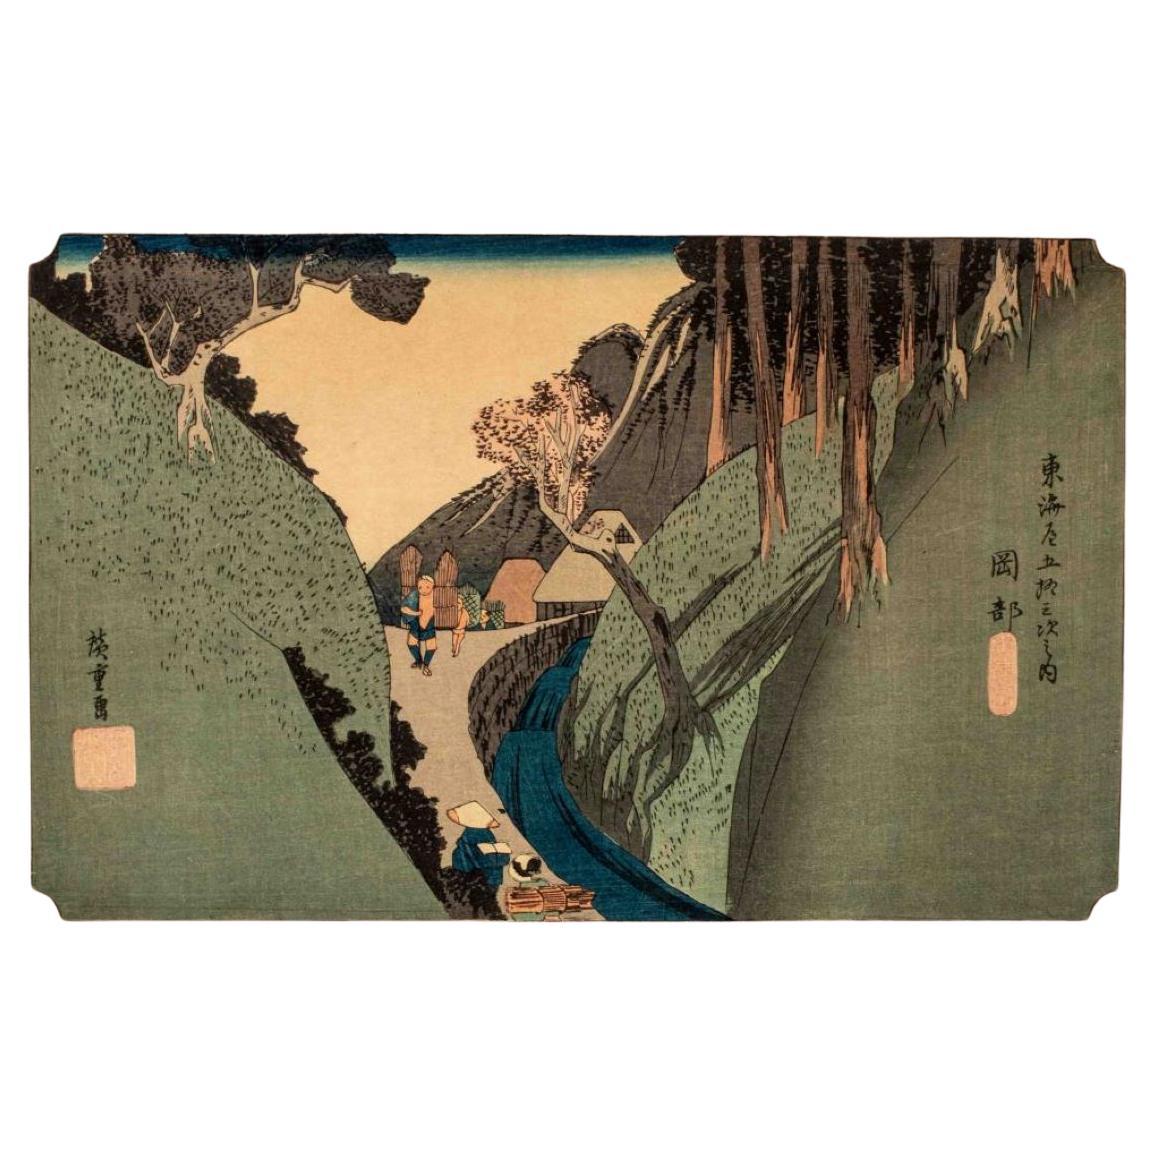 After Hiroshige "Utsu Mountain" Woodblock For Sale